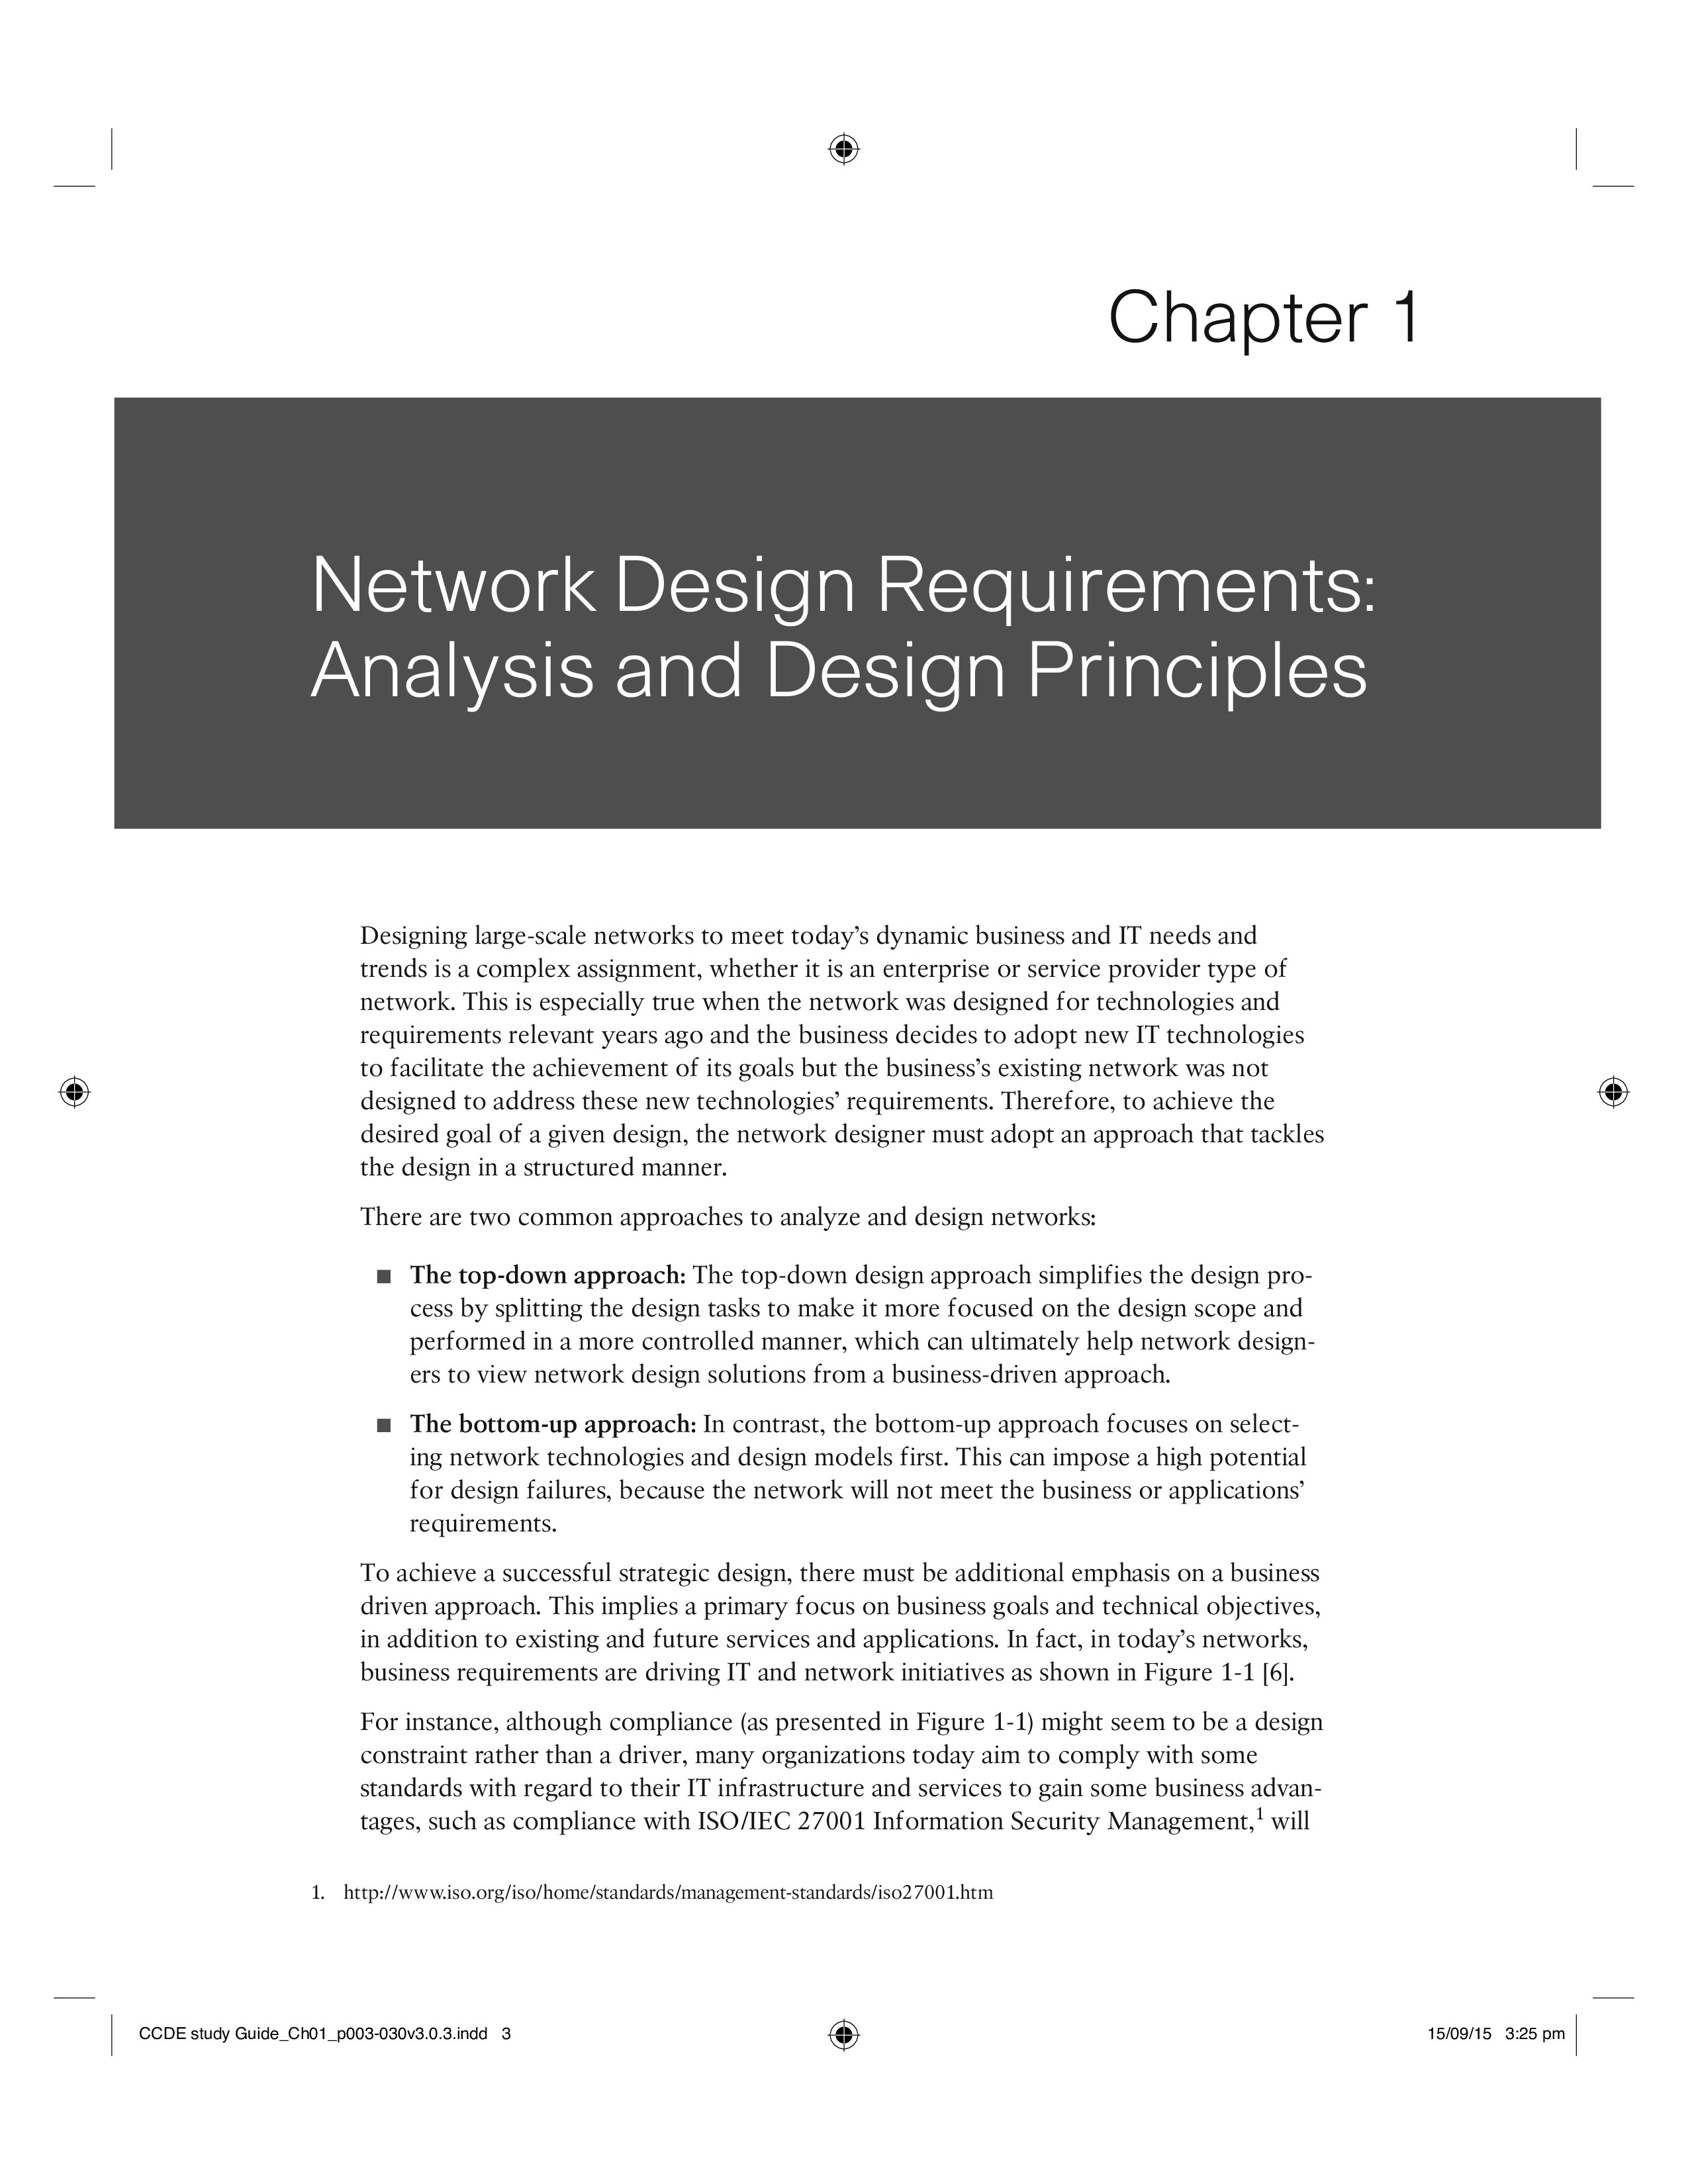 Network Design Requirements Analysis main image